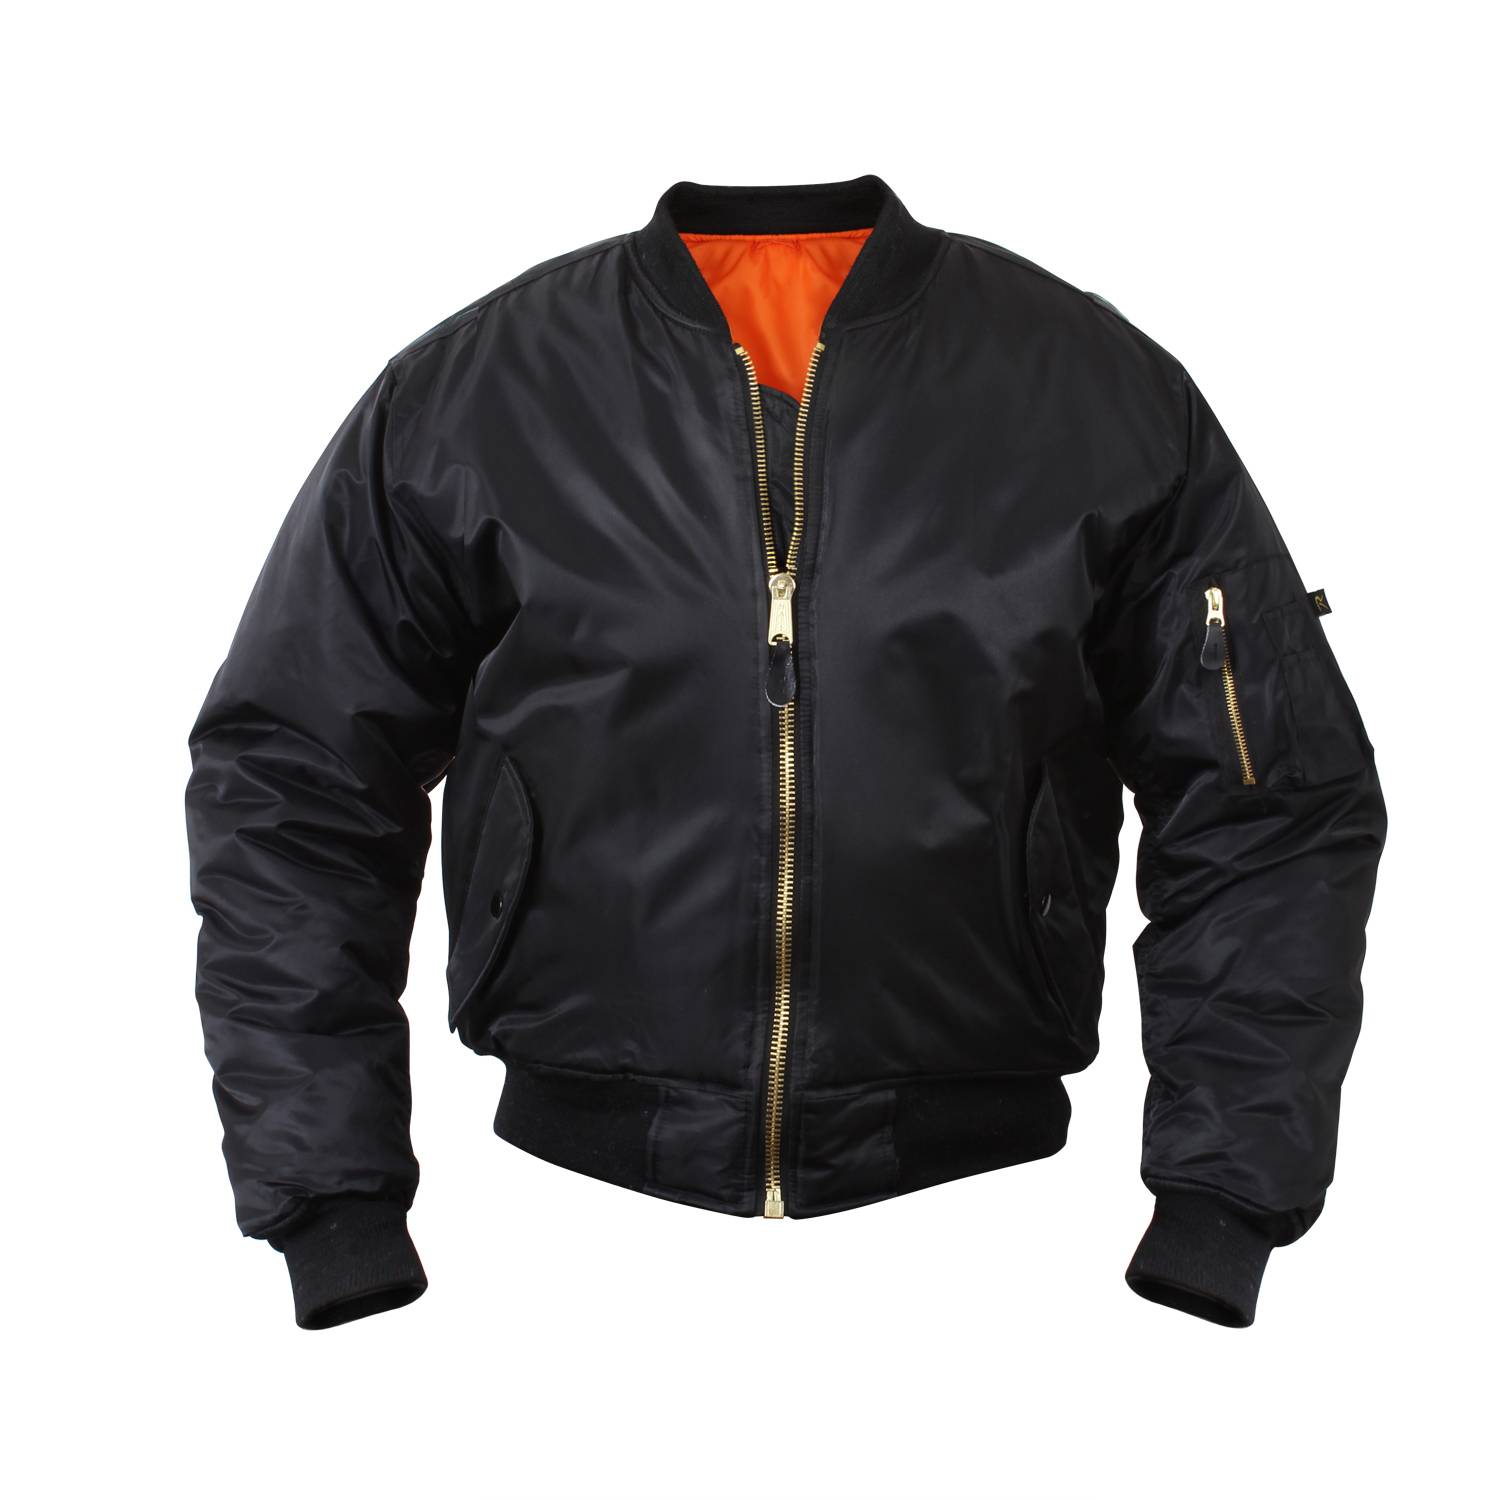 Rothco Concealed Carry MA 1 Flight Jacket